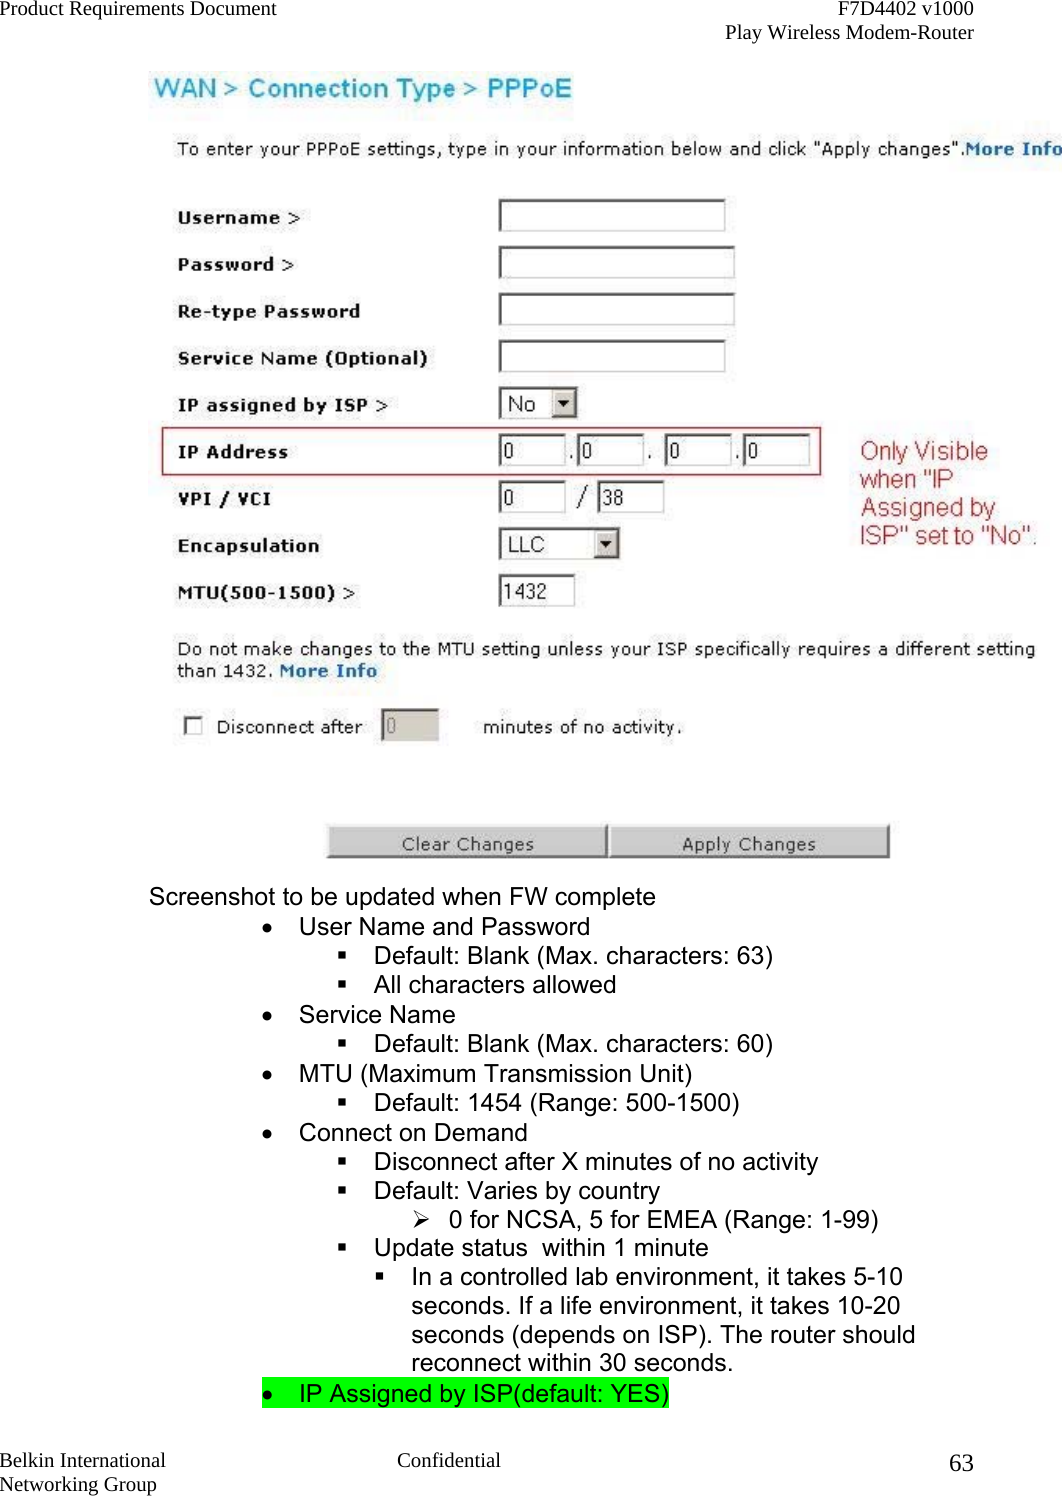 Product Requirements Document    F7D4402 v1000     Play Wireless Modem-Router  Belkin International  Confidential Networking Group 63 Screenshot to be updated when FW complete •  User Name and Password  Default: Blank (Max. characters: 63)  All characters allowed •  Service Name  Default: Blank (Max. characters: 60) •  MTU (Maximum Transmission Unit)  Default: 1454 (Range: 500-1500) •  Connect on Demand   Disconnect after X minutes of no activity  Default: Varies by country  0 for NCSA, 5 for EMEA (Range: 1-99)  Update status  within 1 minute   In a controlled lab environment, it takes 5-10 seconds. If a life environment, it takes 10-20 seconds (depends on ISP). The router should reconnect within 30 seconds. •  IP Assigned by ISP(default: YES) 